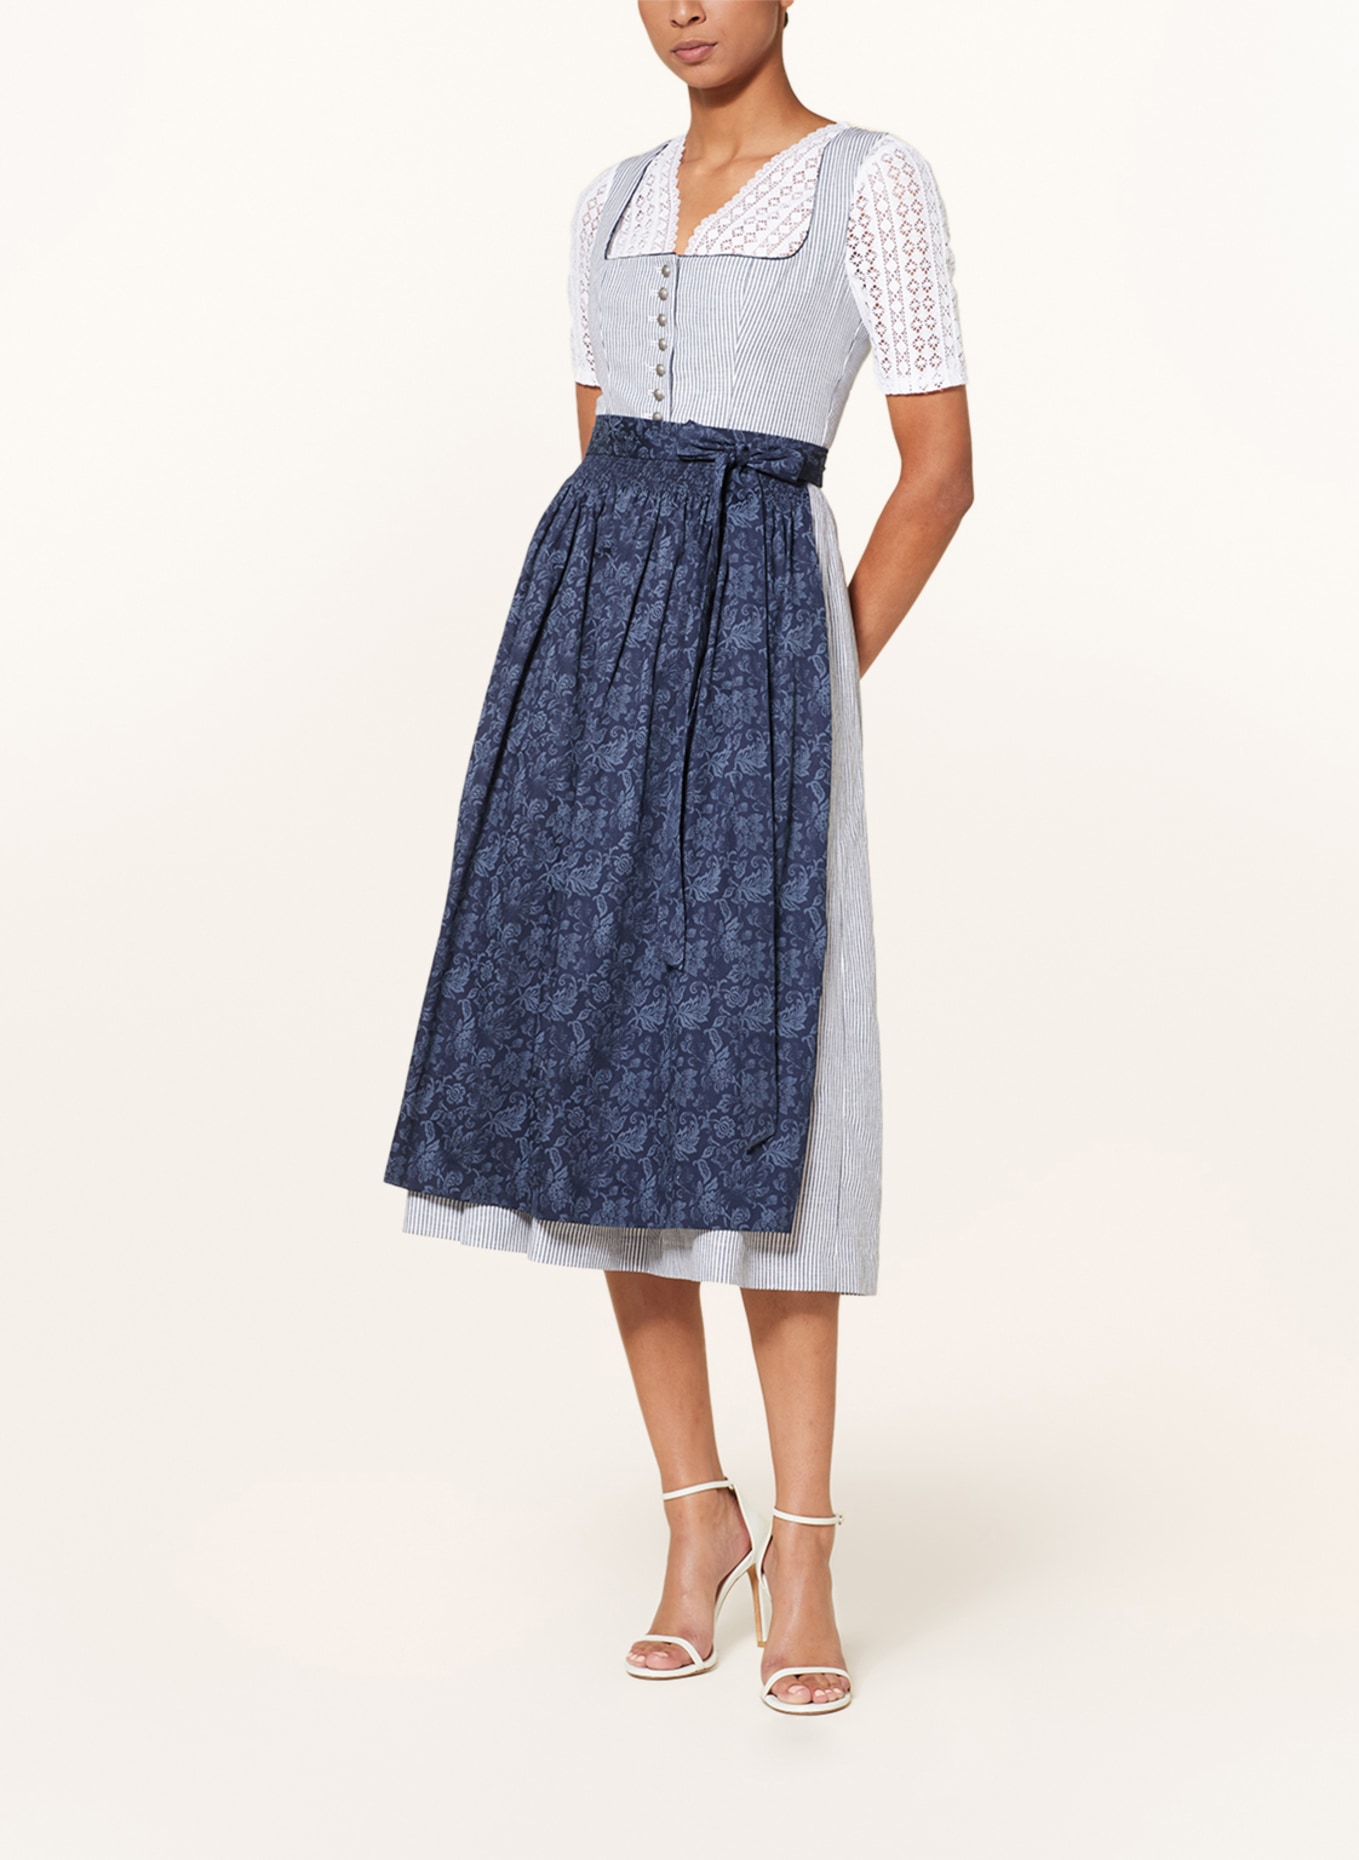 WALDORFF Dirndl blouse with crochet lace, Color: WHITE (Image 4)